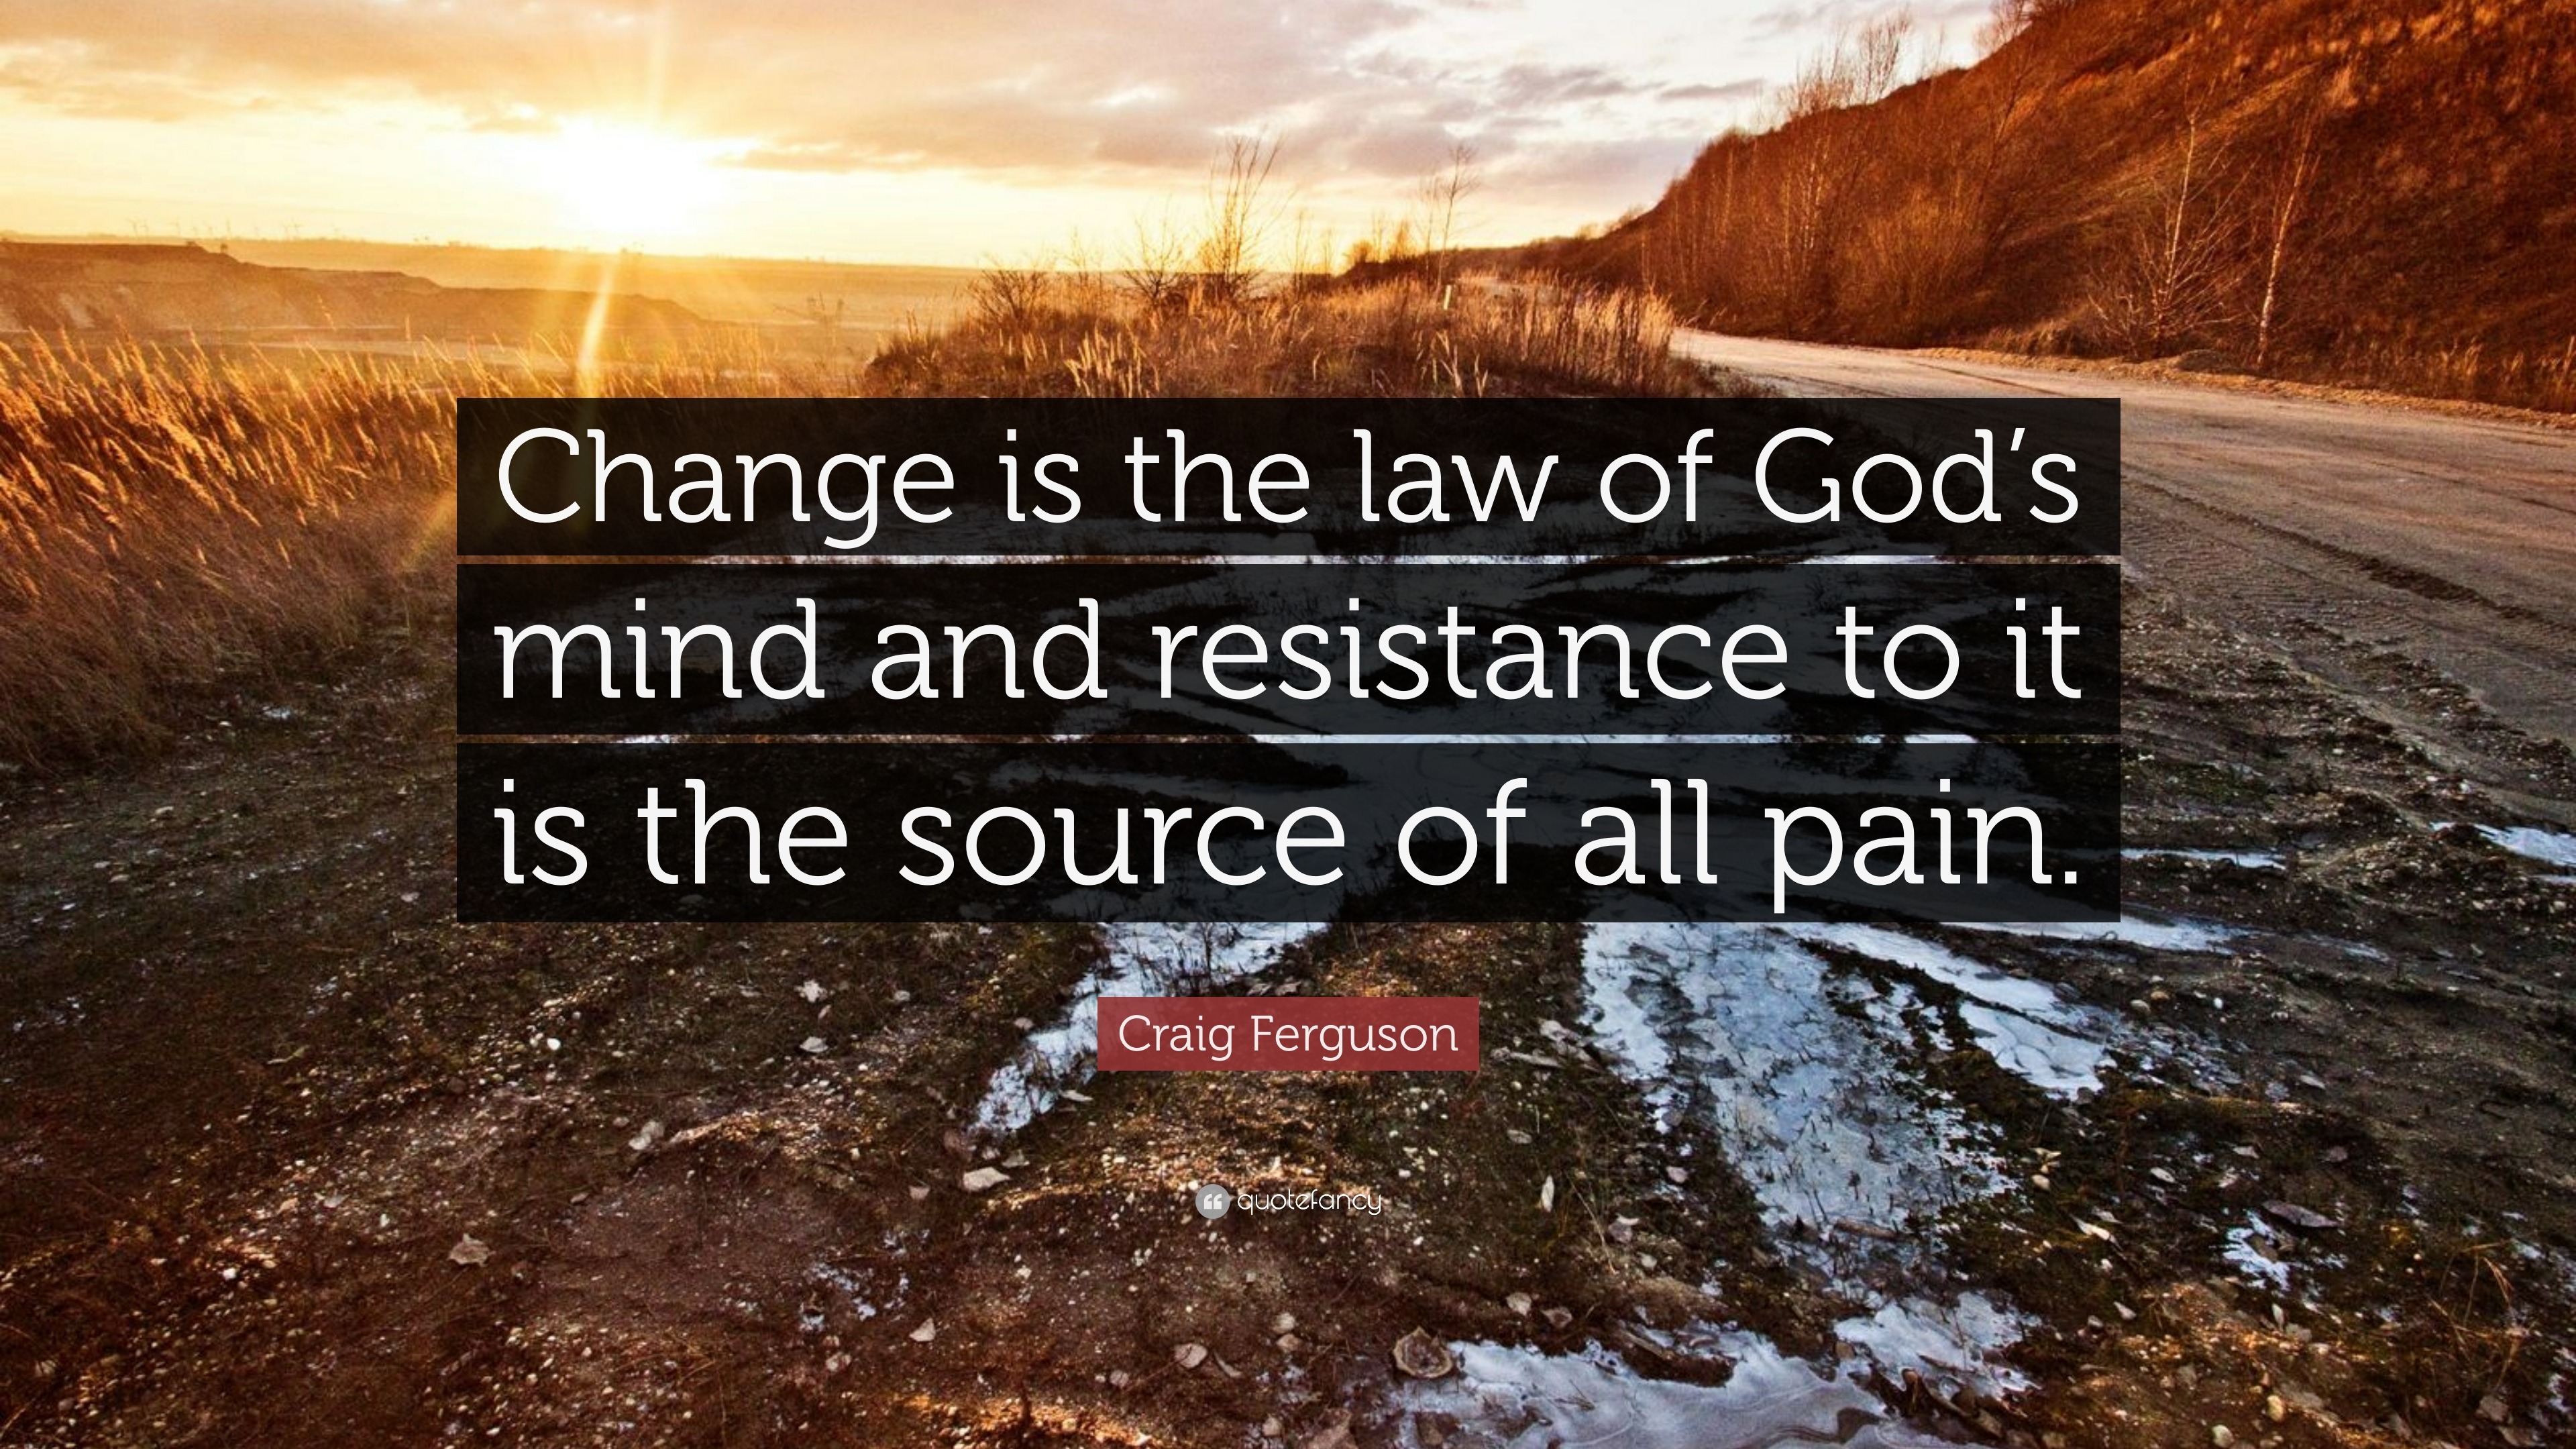 Craig Ferguson Quote: “Change is the law of God’s mind and resistance ...